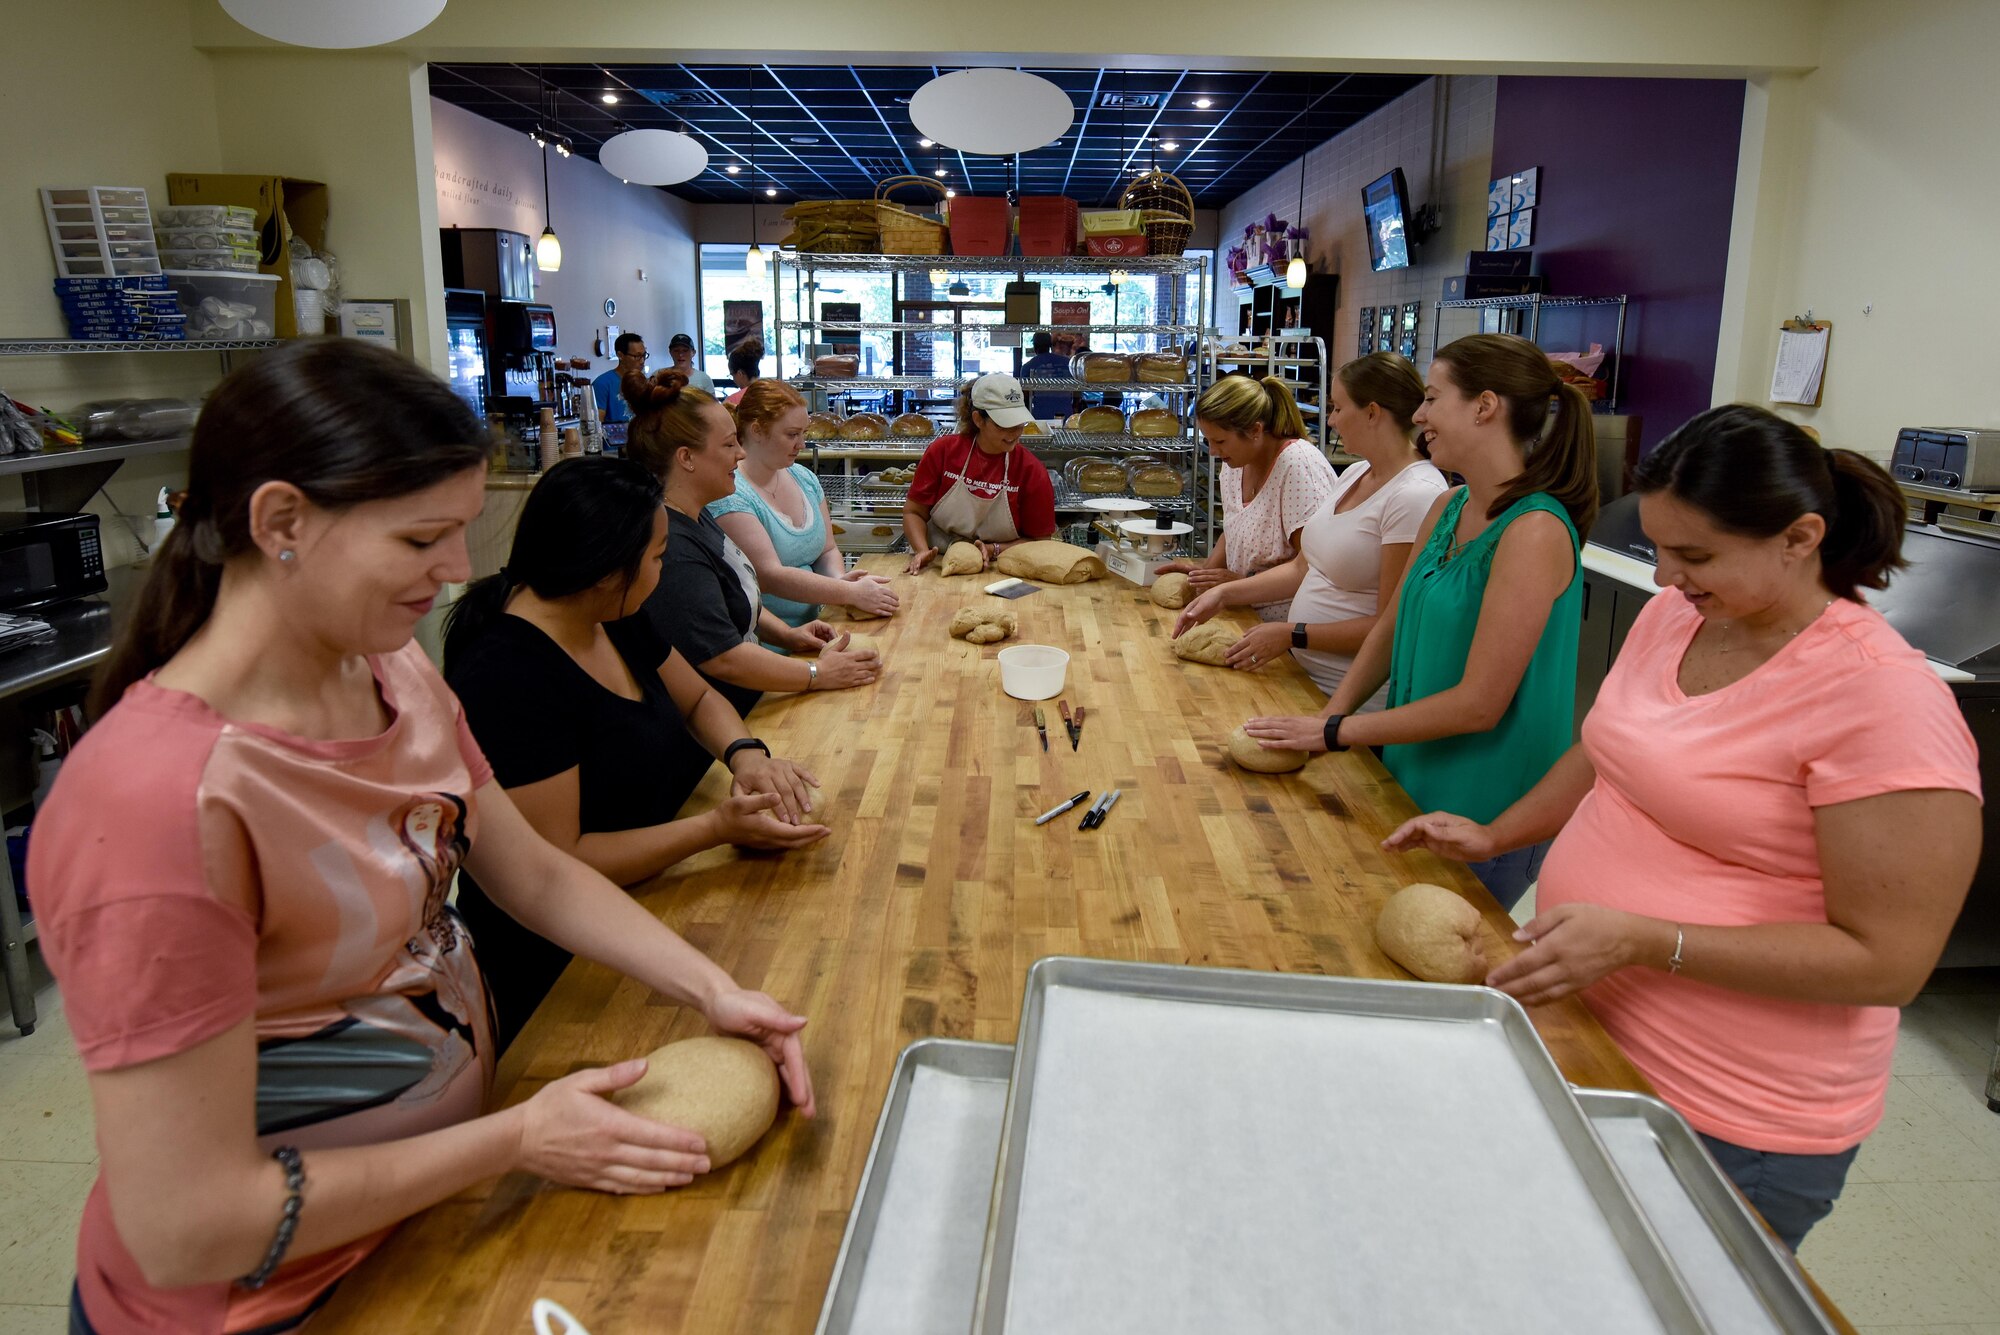 Michele Jones, local bread company co-owner, shows spouses from Team Seymour how to prepare bread, July 9, 2016, in Goldsboro, North Carolina. During an instructional workshop as part of the Hearts Apart program, spouses learned about the entire bread-making process. (U.S. Air Force photo by Airman Shawna L. Keyes)